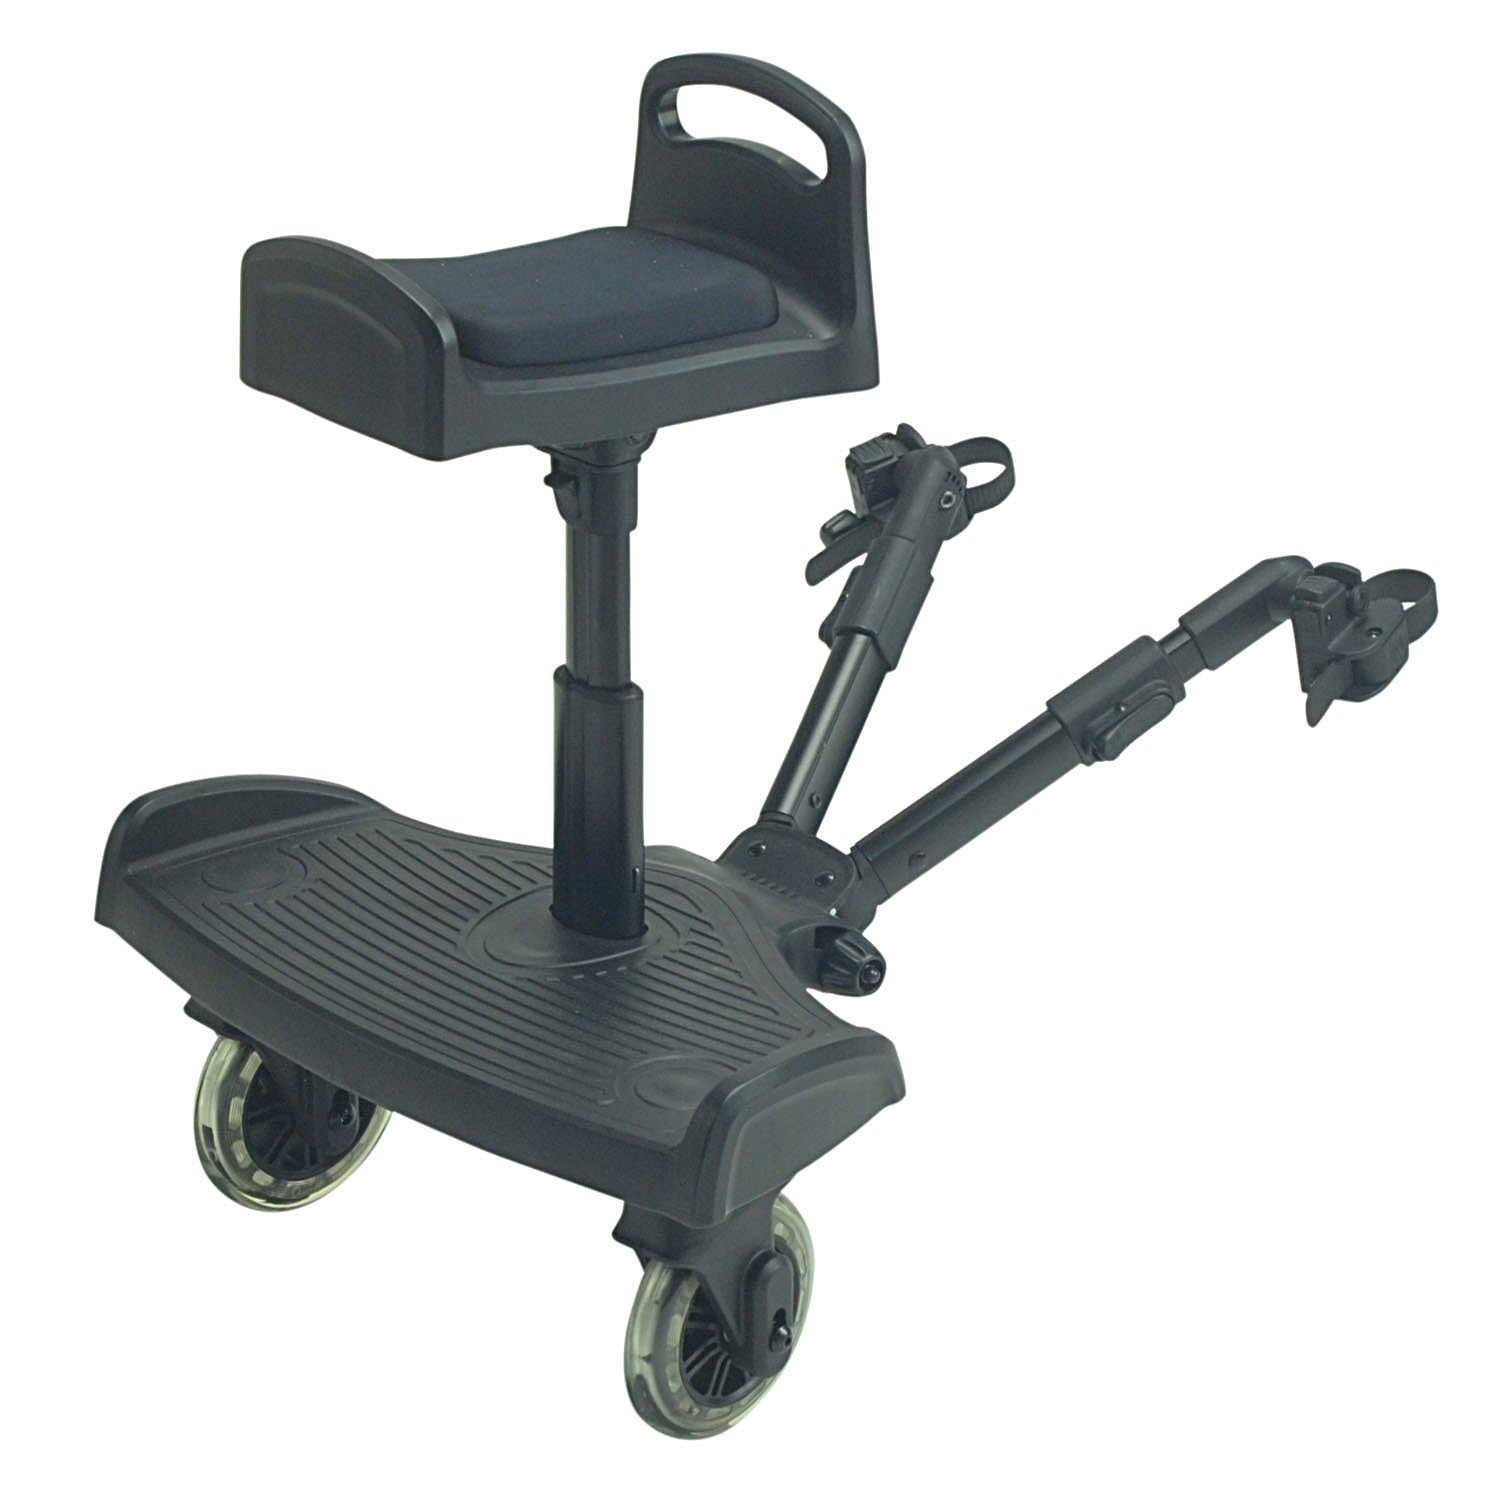 For-your-Little-One For-Your-Little-Ride On Board Compatible Travel Systems, Quinny Pushchair